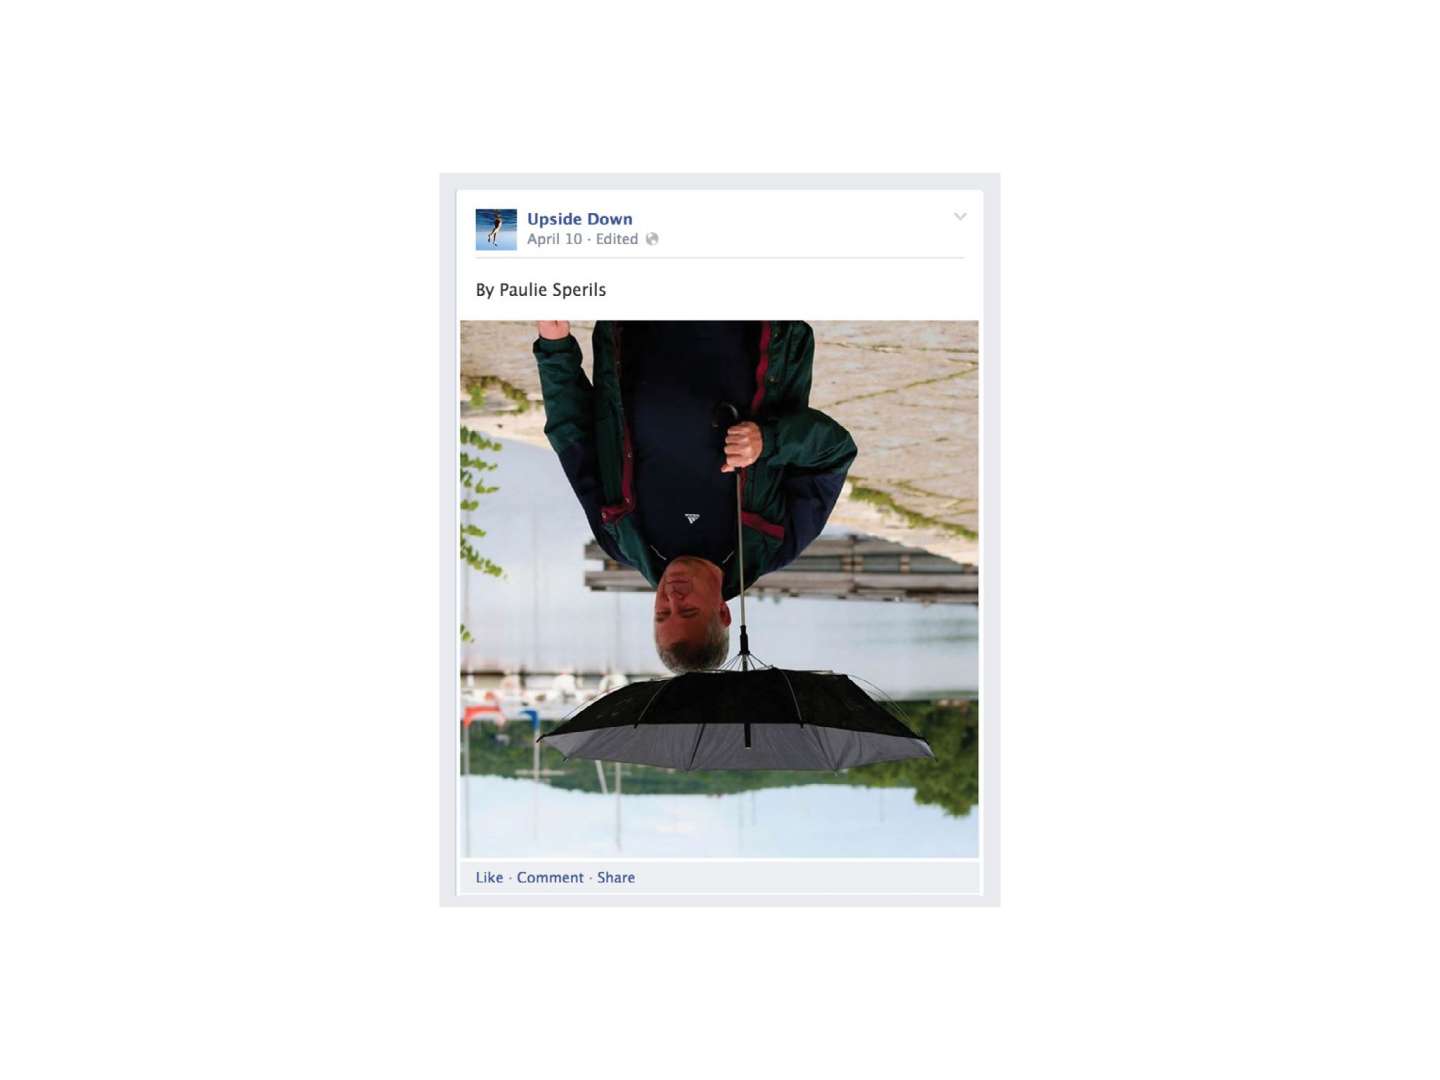 Upside Down Facebook Page